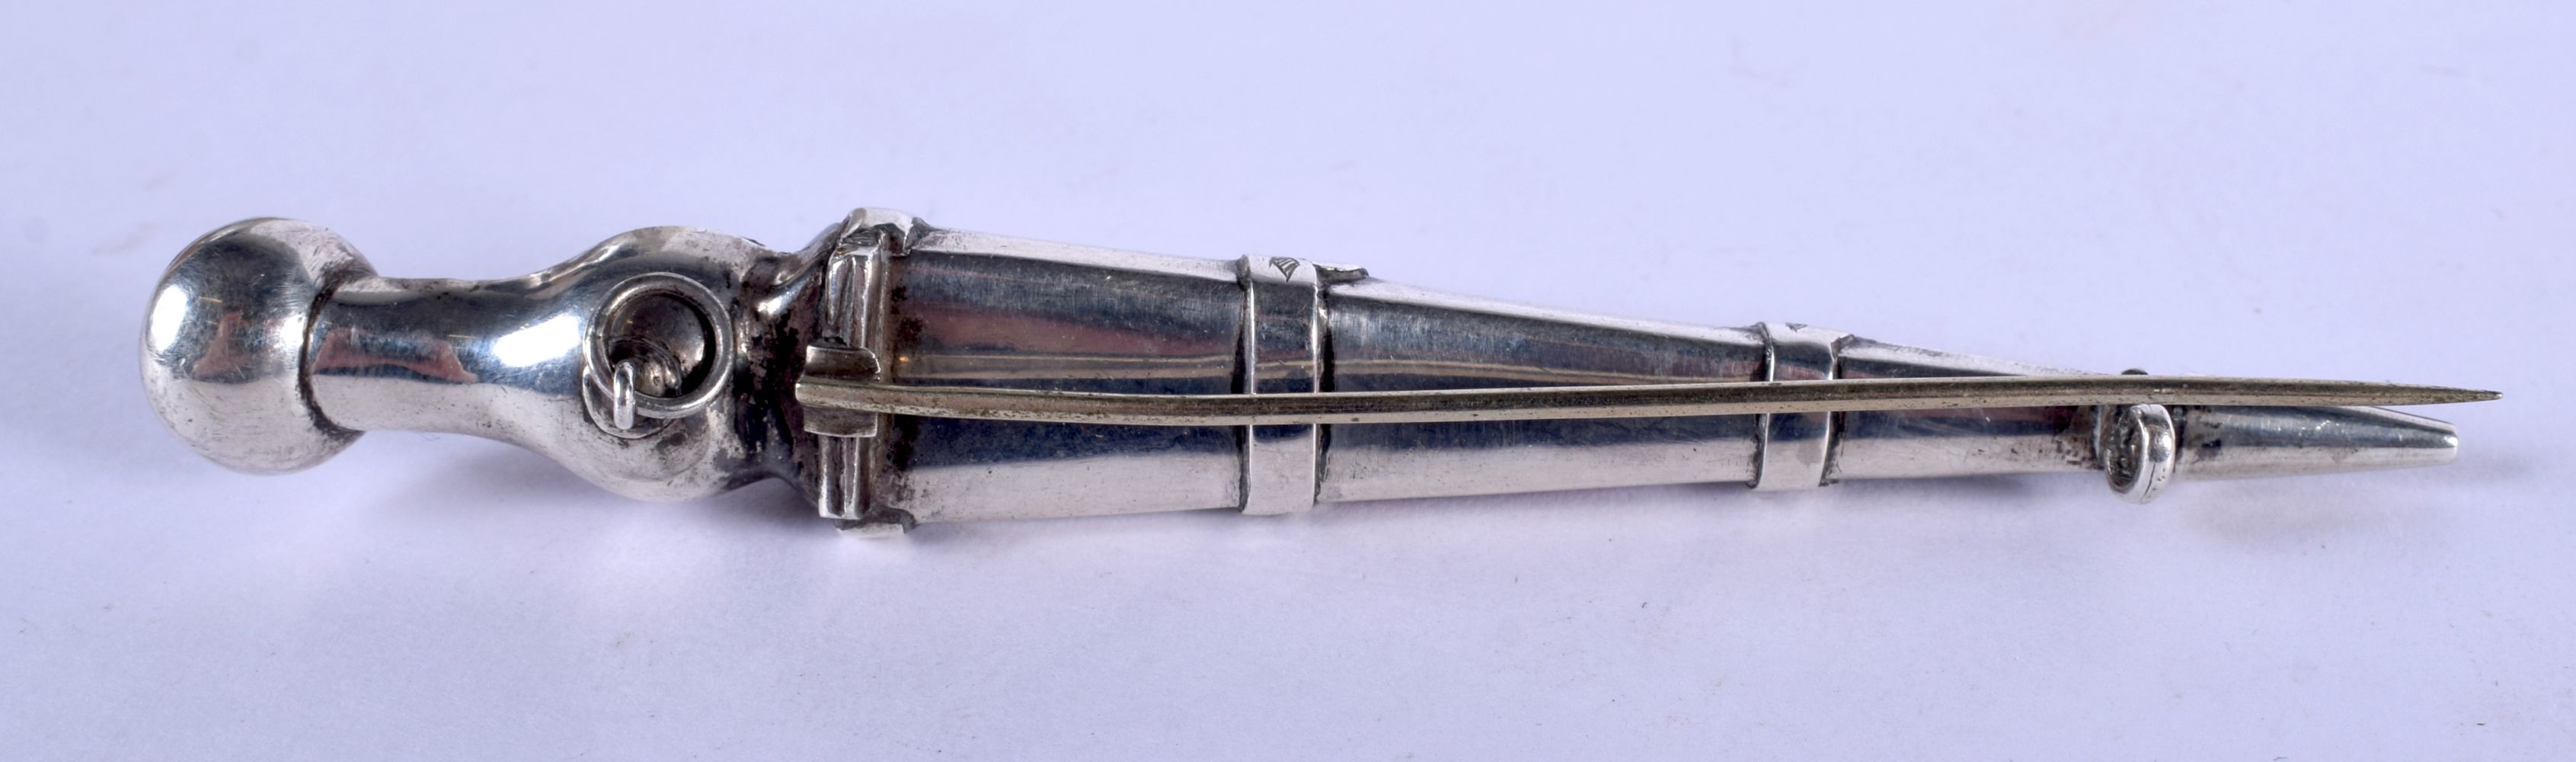 A SCOTTISH SILVER AND AGATE DIRK DAGGER. 17 grams. 10 cm long. - Image 2 of 2